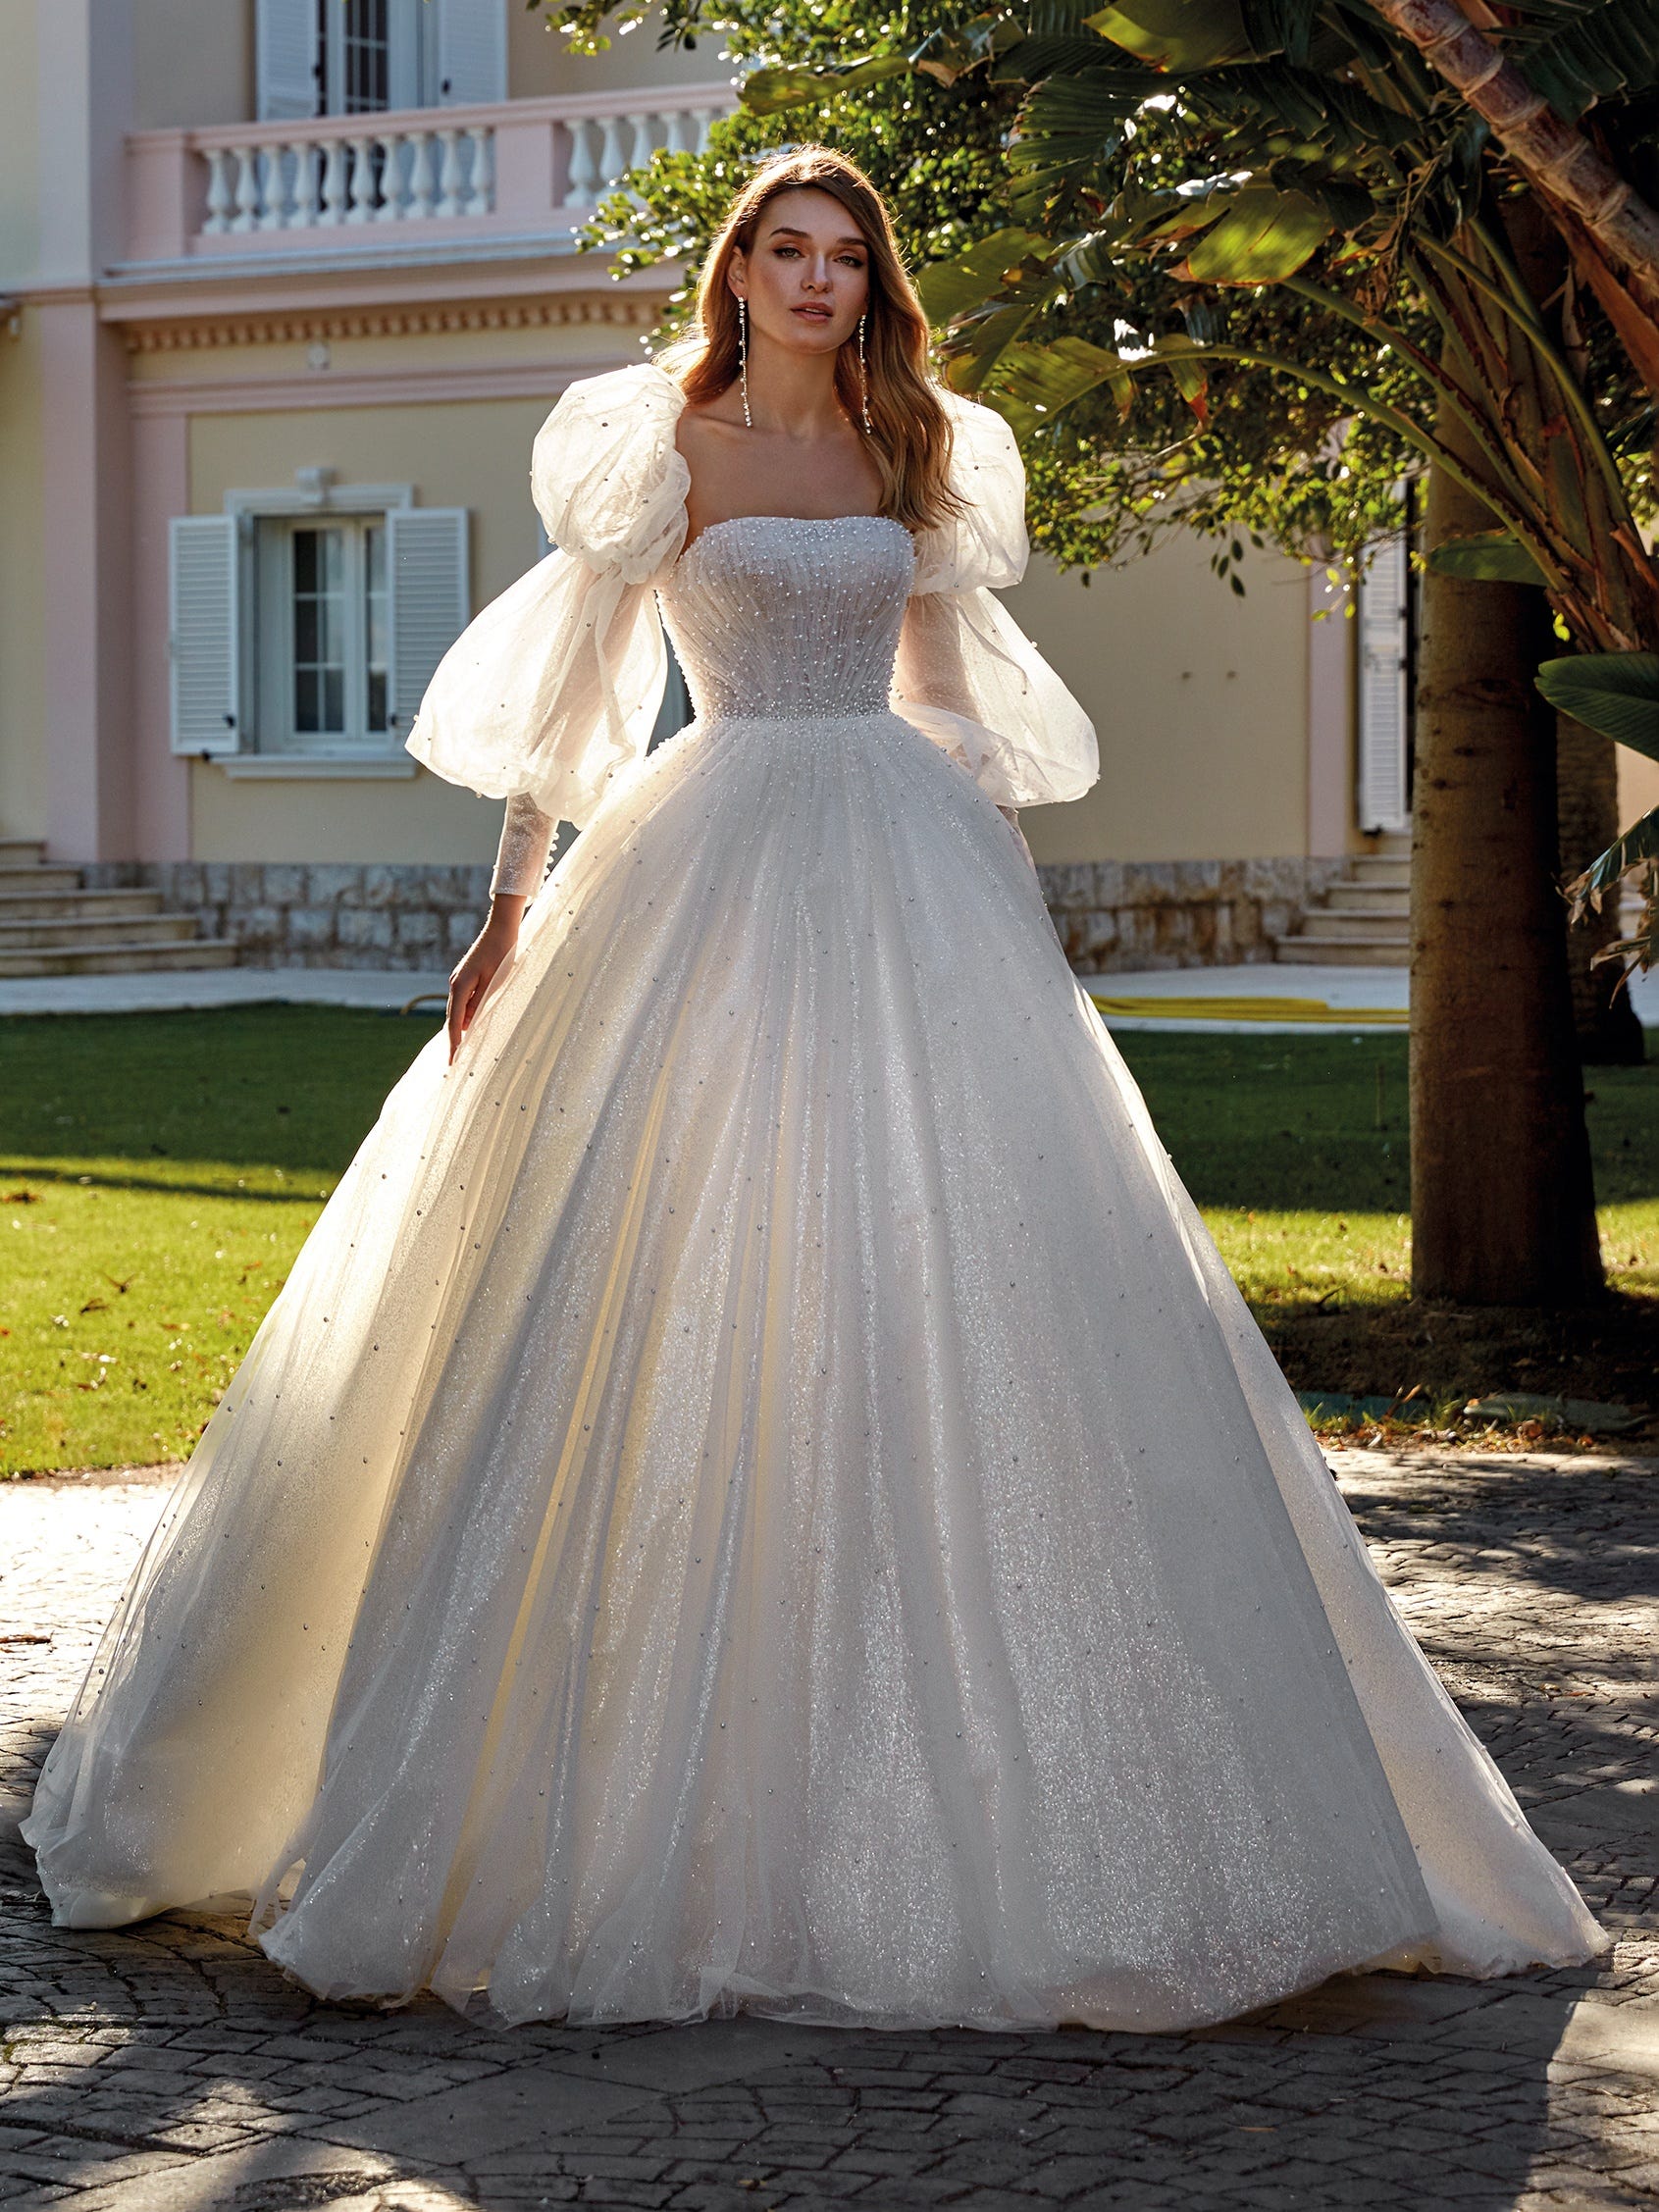 Sparkly Luxury Princess Ball Gown Wedding Dresses with Long Sleeve 672 –  Viniodress